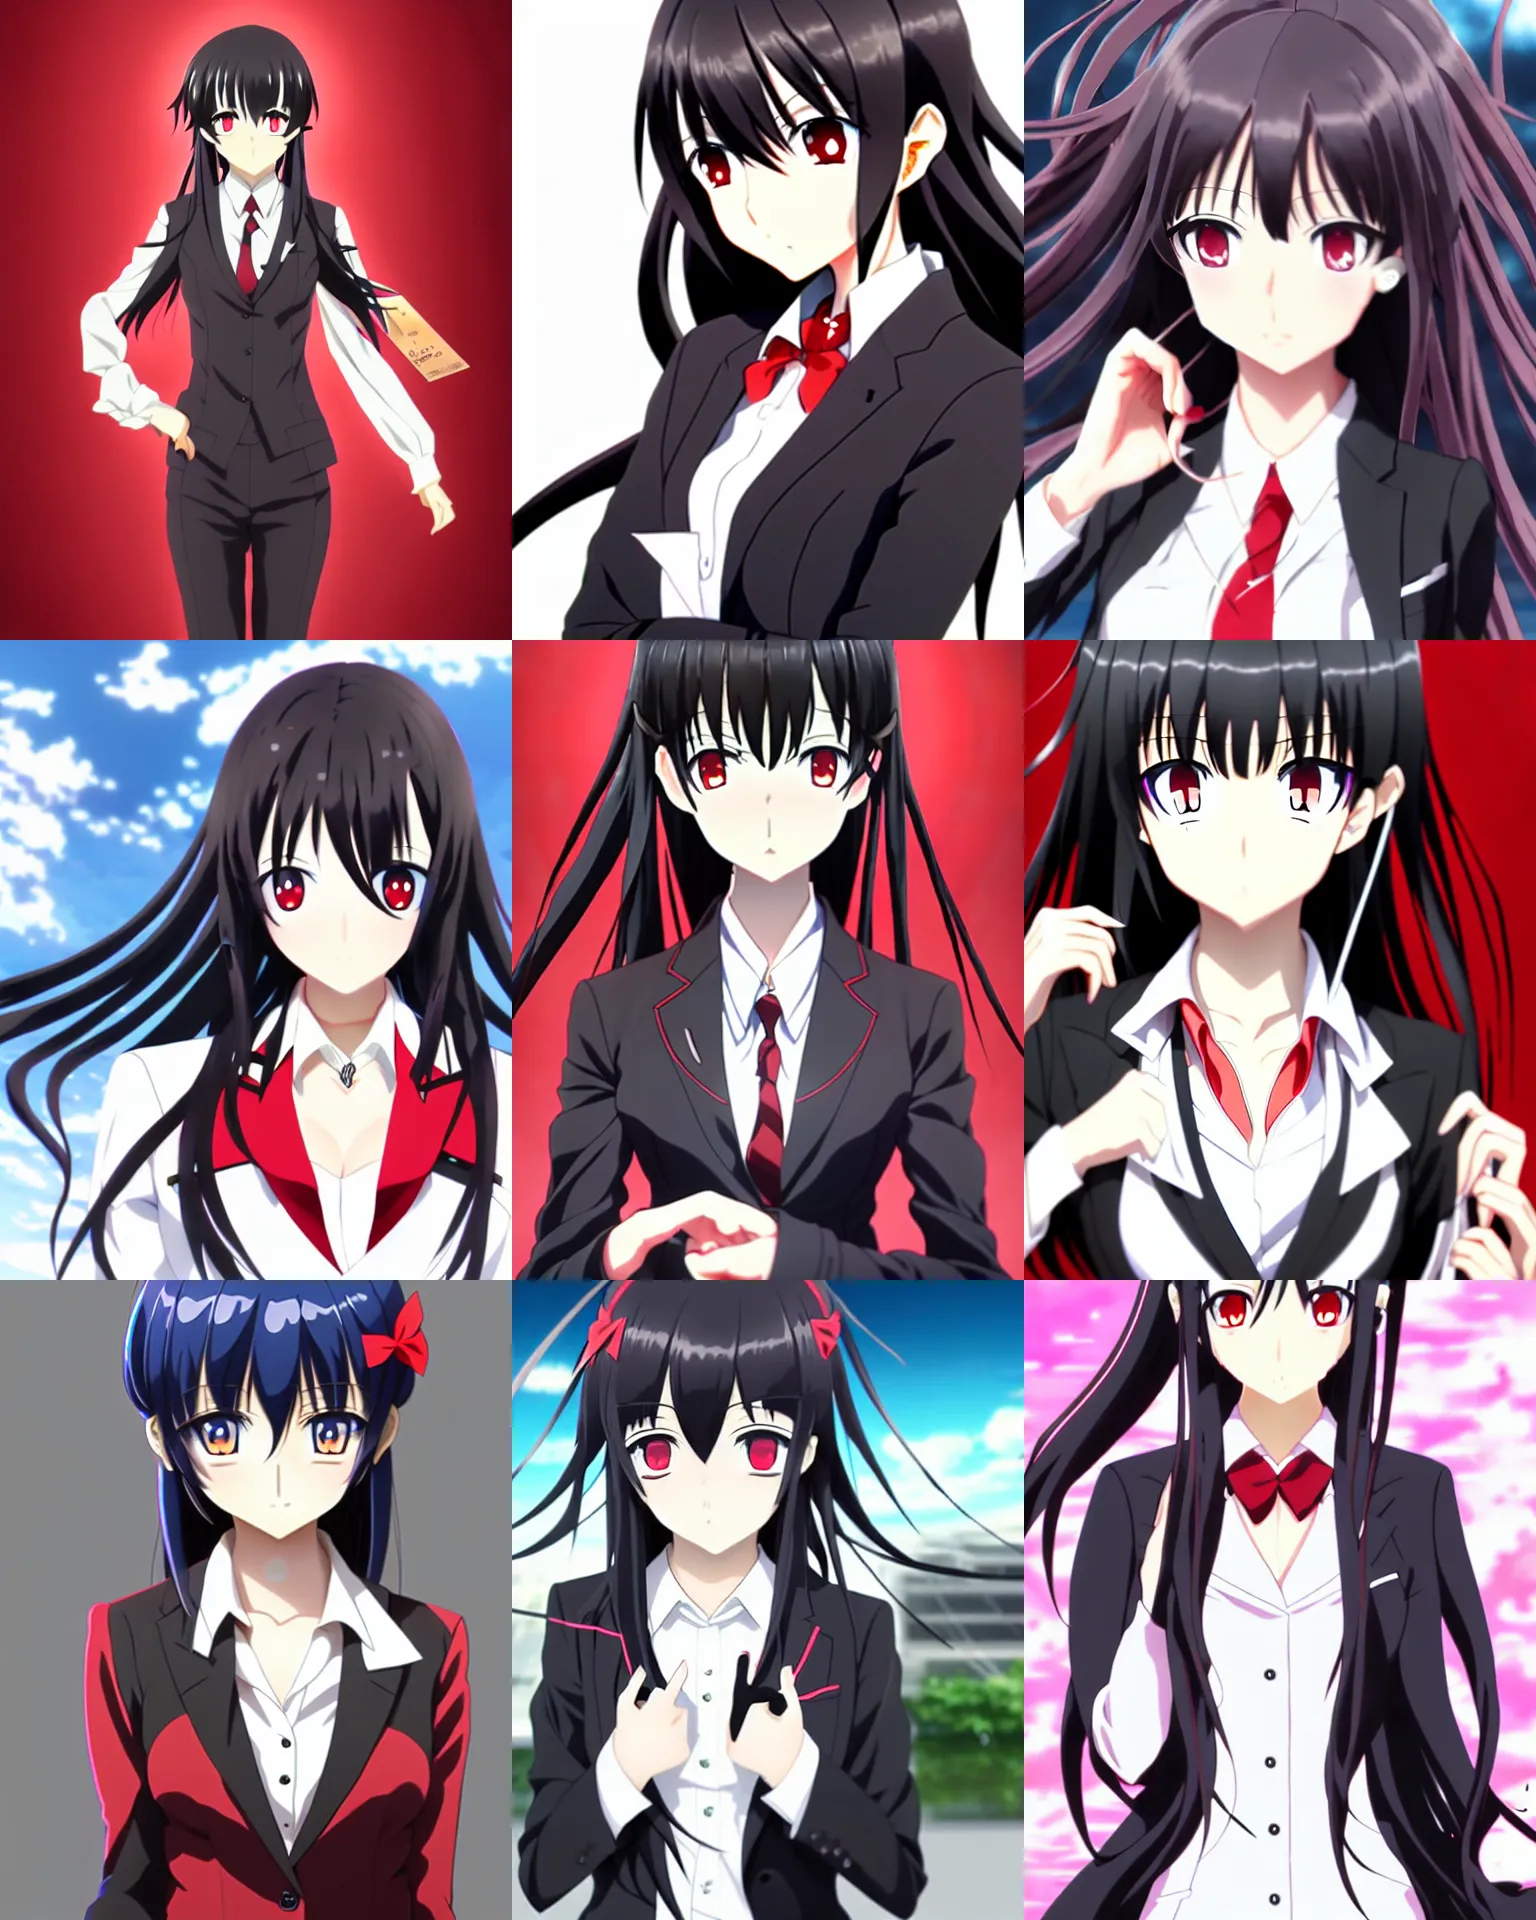 Share 138+ black haired anime woman super hot - awesomeenglish.edu.vn